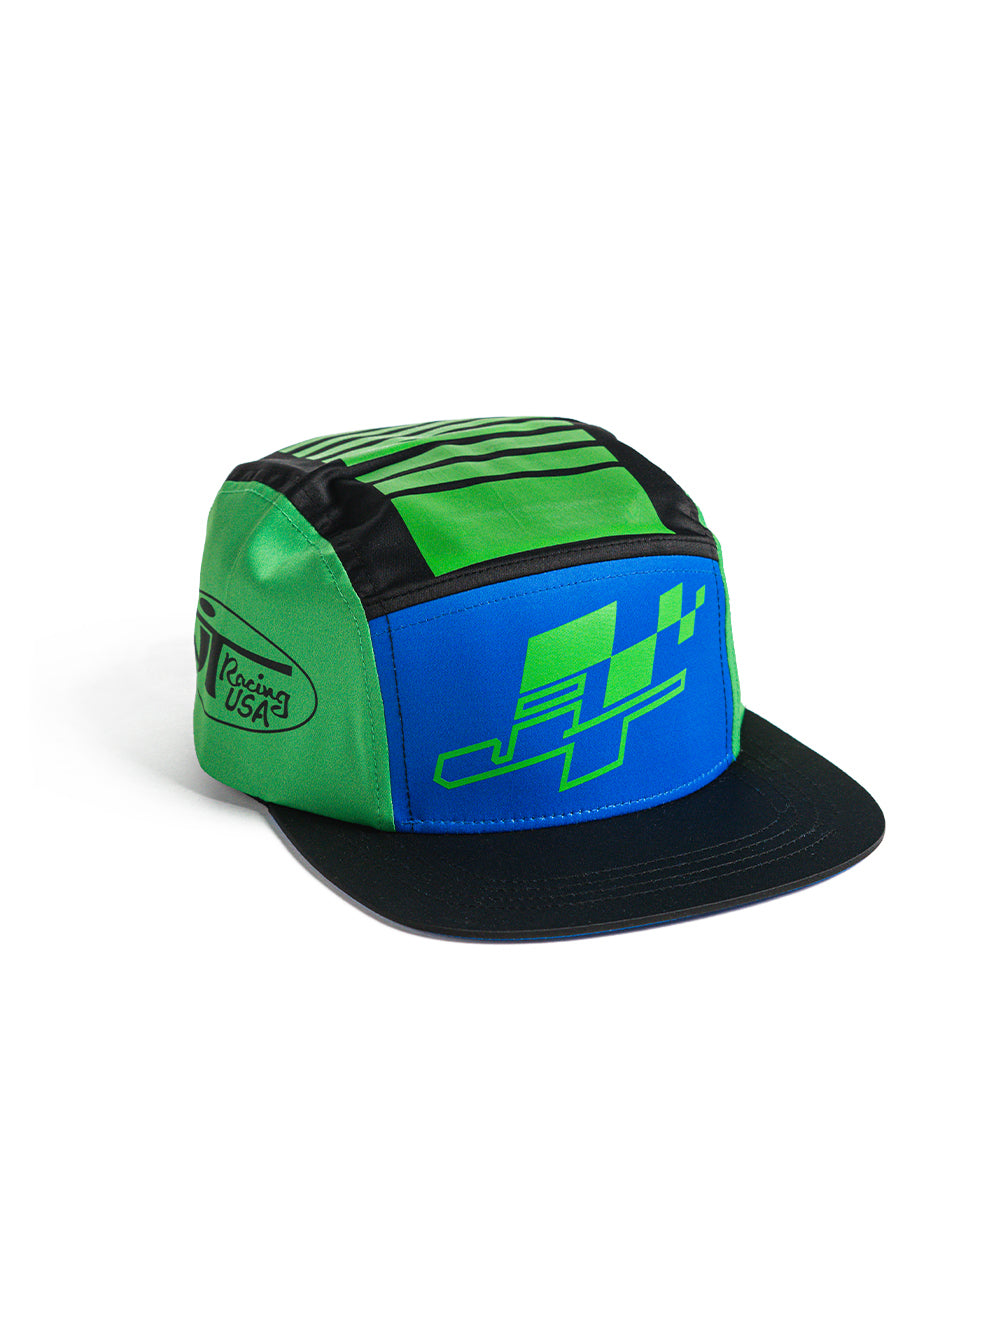 JT Racing Flat 5 Panel Hat - Blue and Green